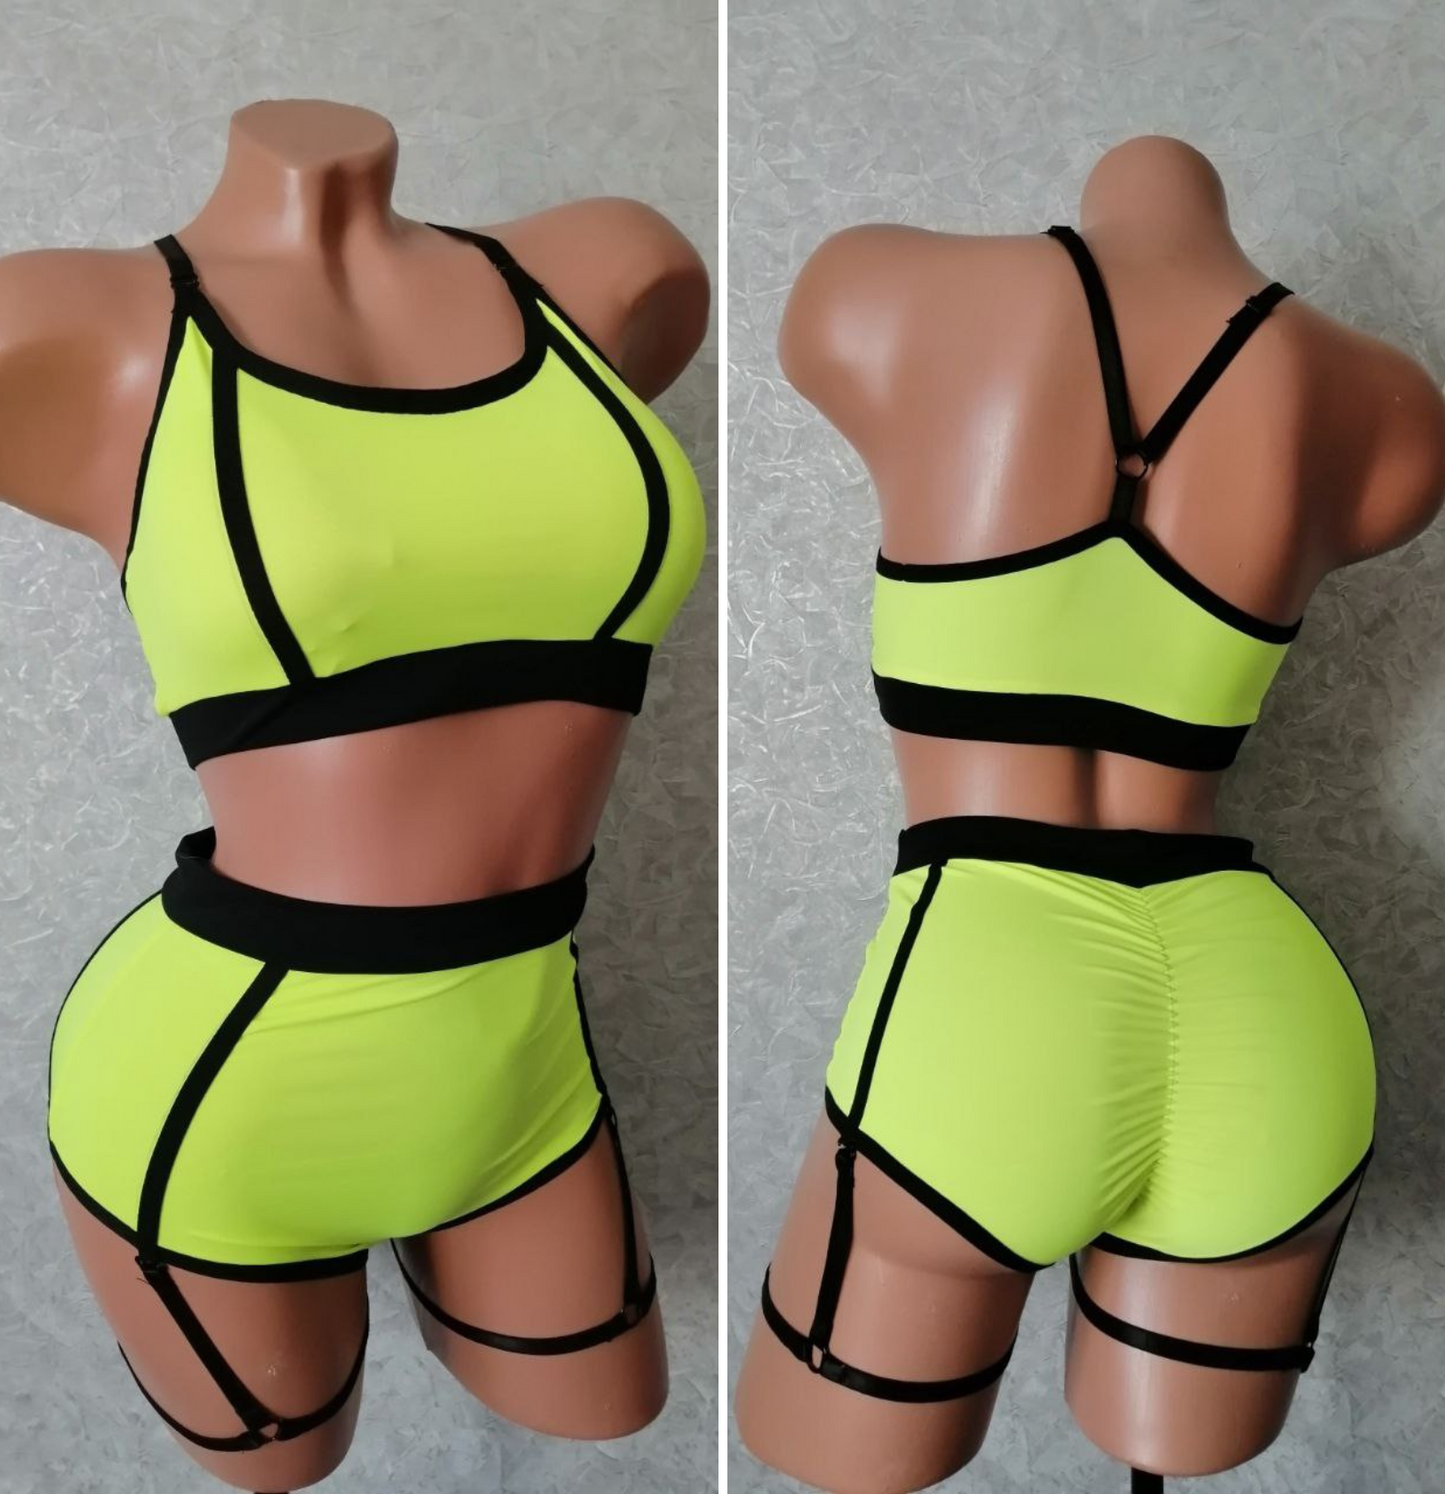 Neon yellow pole dance outfit with black garter